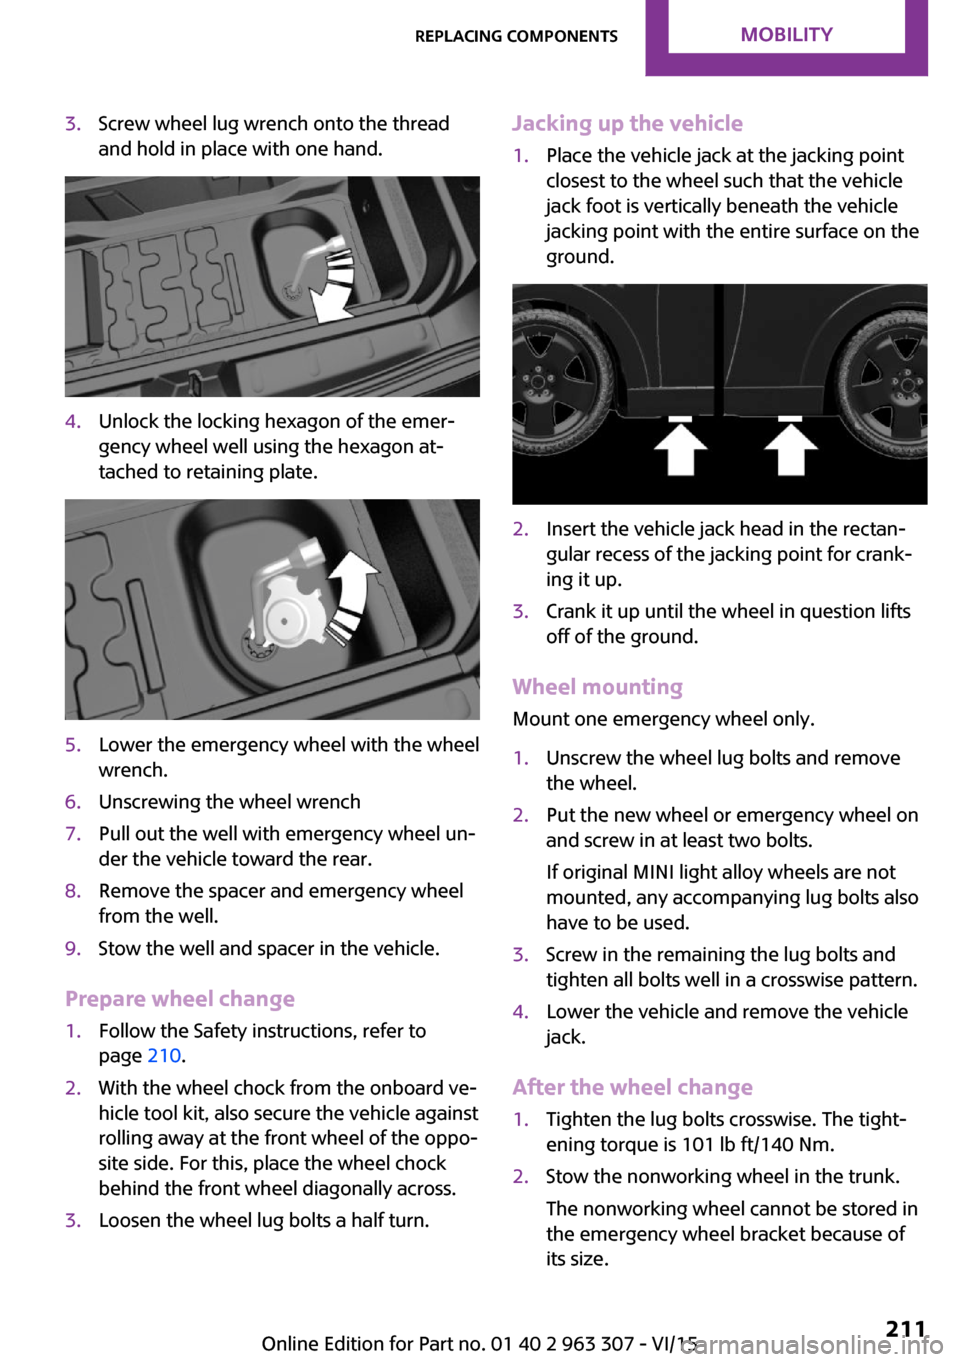 MINI Hardtop 4 Door 2016  Owners Manual 3.Screw wheel lug wrench onto the thread
and hold in place with one hand.4.Unlock the locking hexagon of the emer‐
gency wheel well using the hexagon at‐
tached to retaining plate.5.Lower the emer